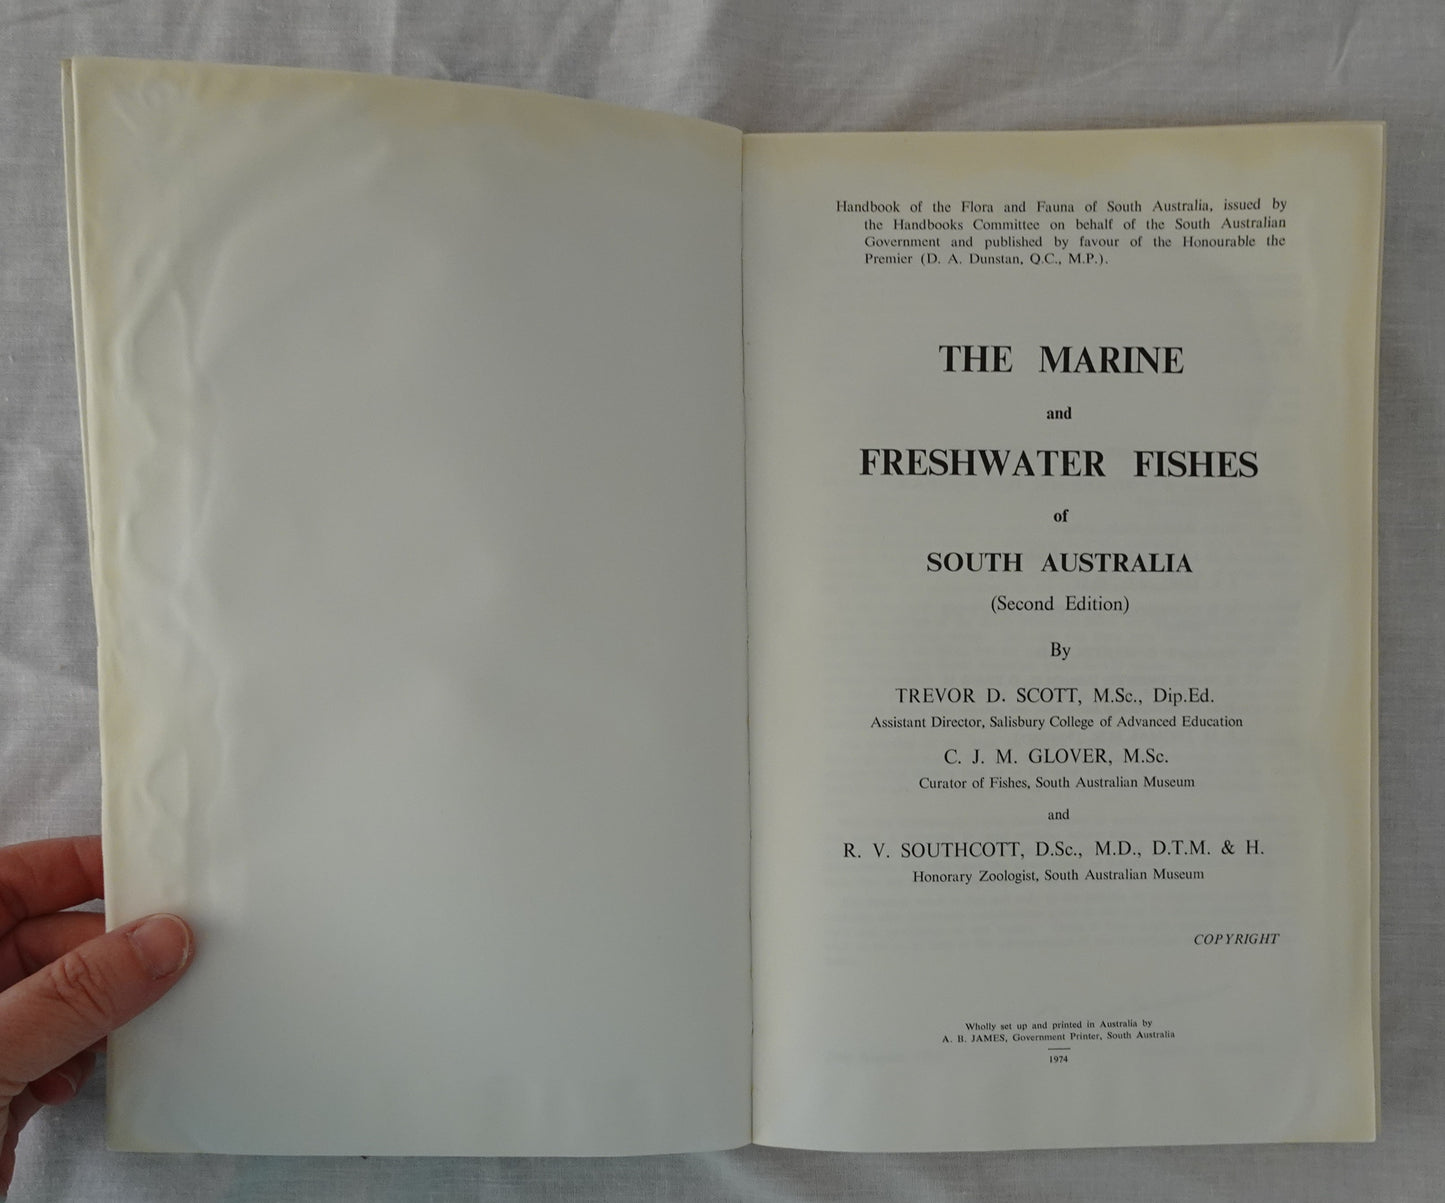 The Marine and Freshwater Fishes of South Australia T. D. Scott, C. J. M. Glover and R. V. Southcott